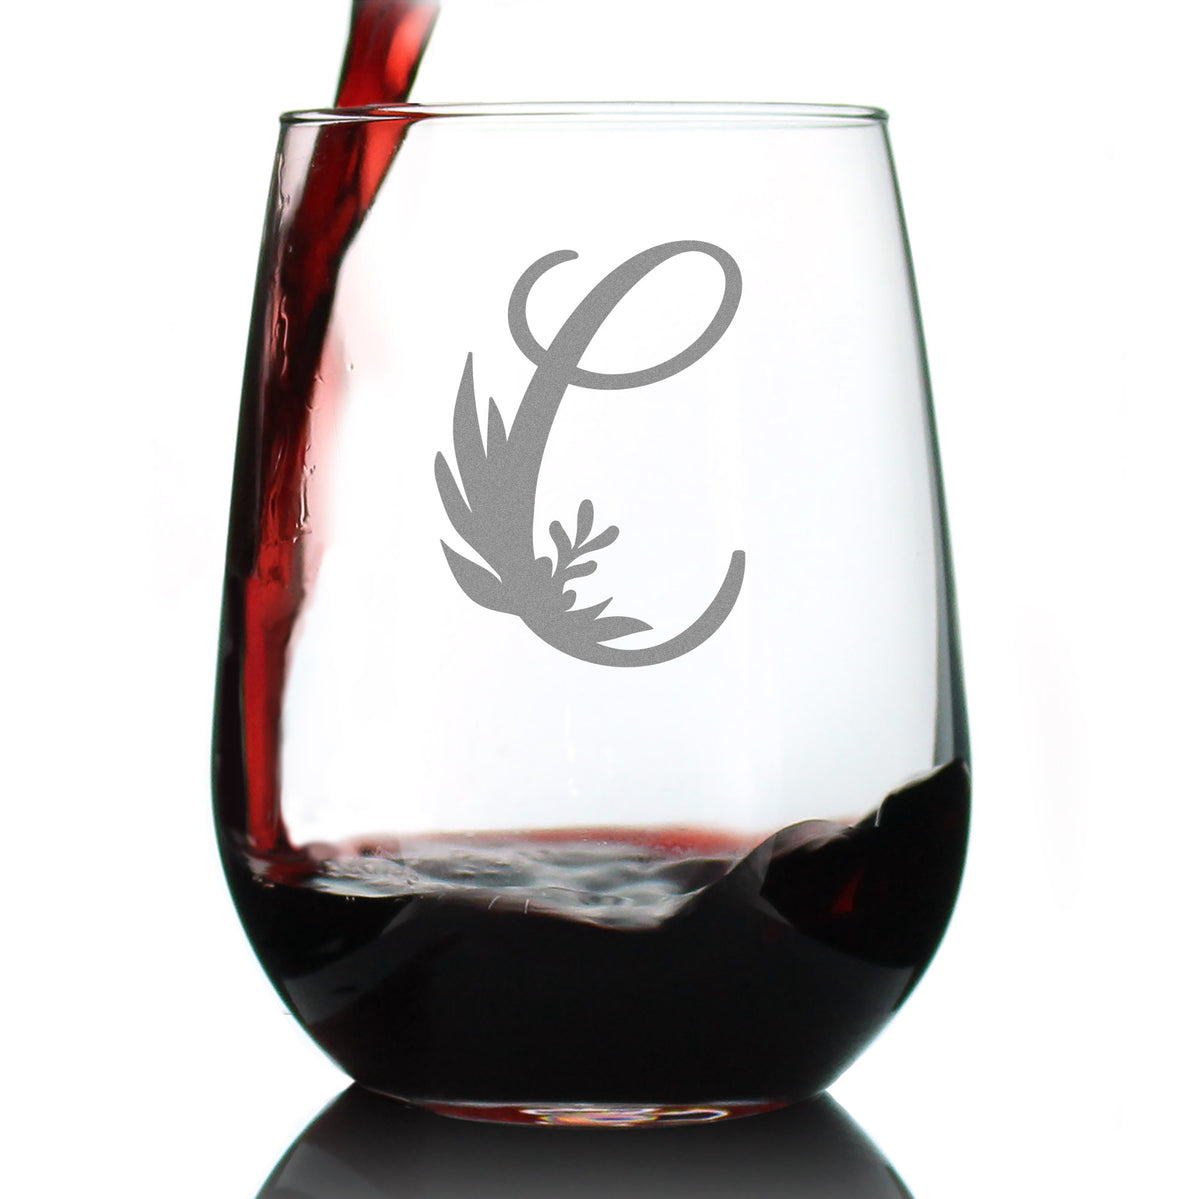 Monogram Floral Letter C - Stemless Wine Glass - Personalized Gifts for Women and Men - Large Engraved Glasses